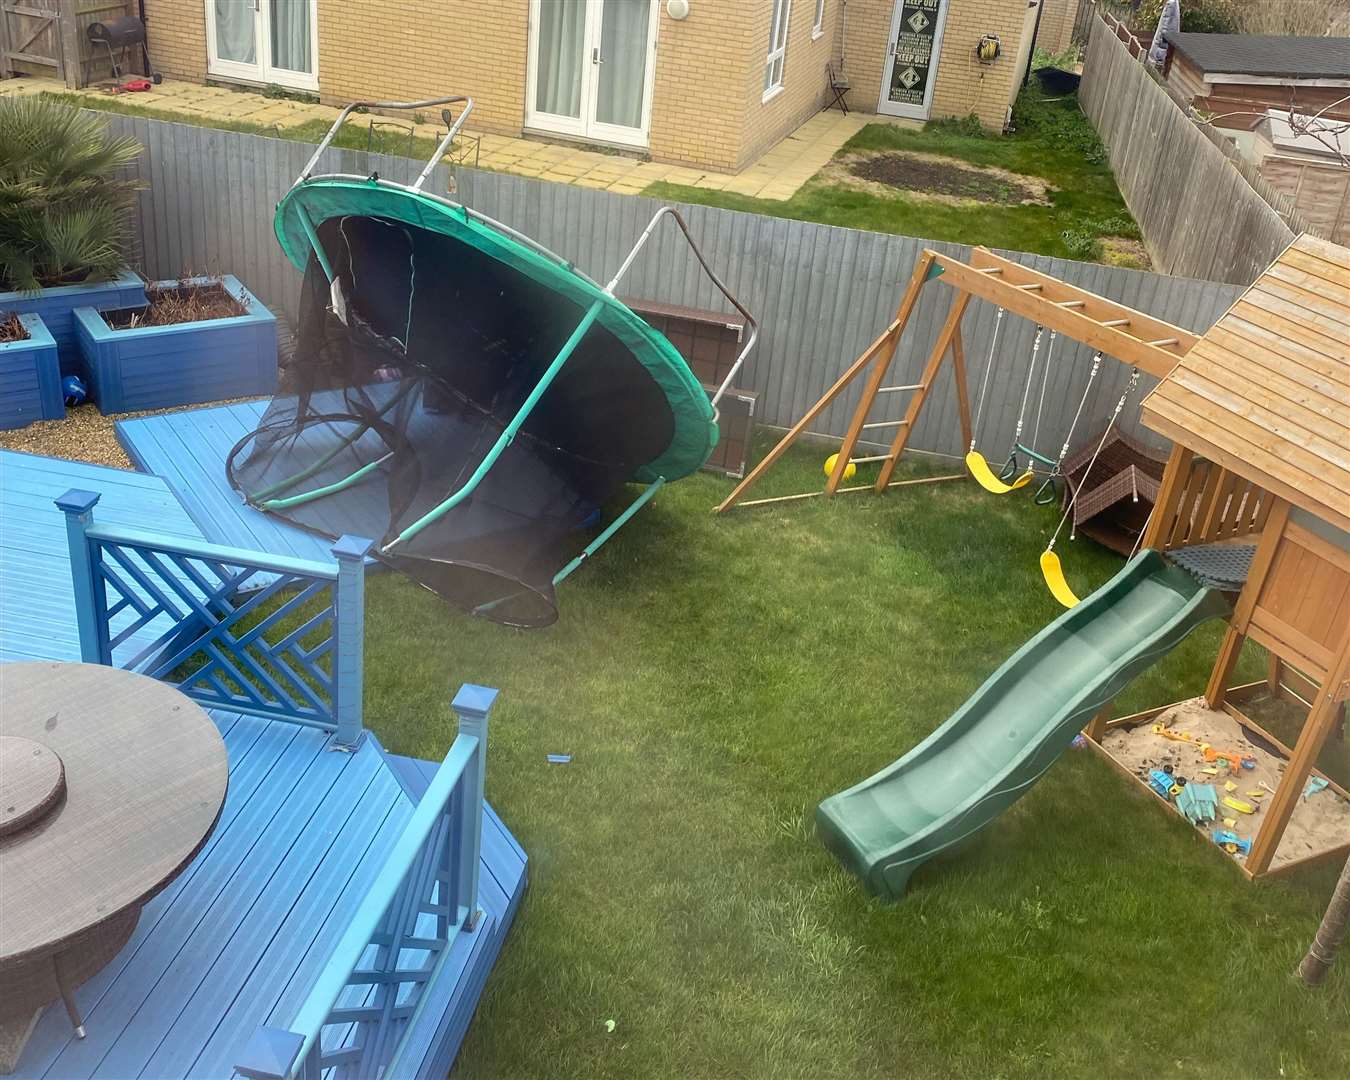 This trampoline blew into Serena Tadd's garden on St Mary's Island near Chatham